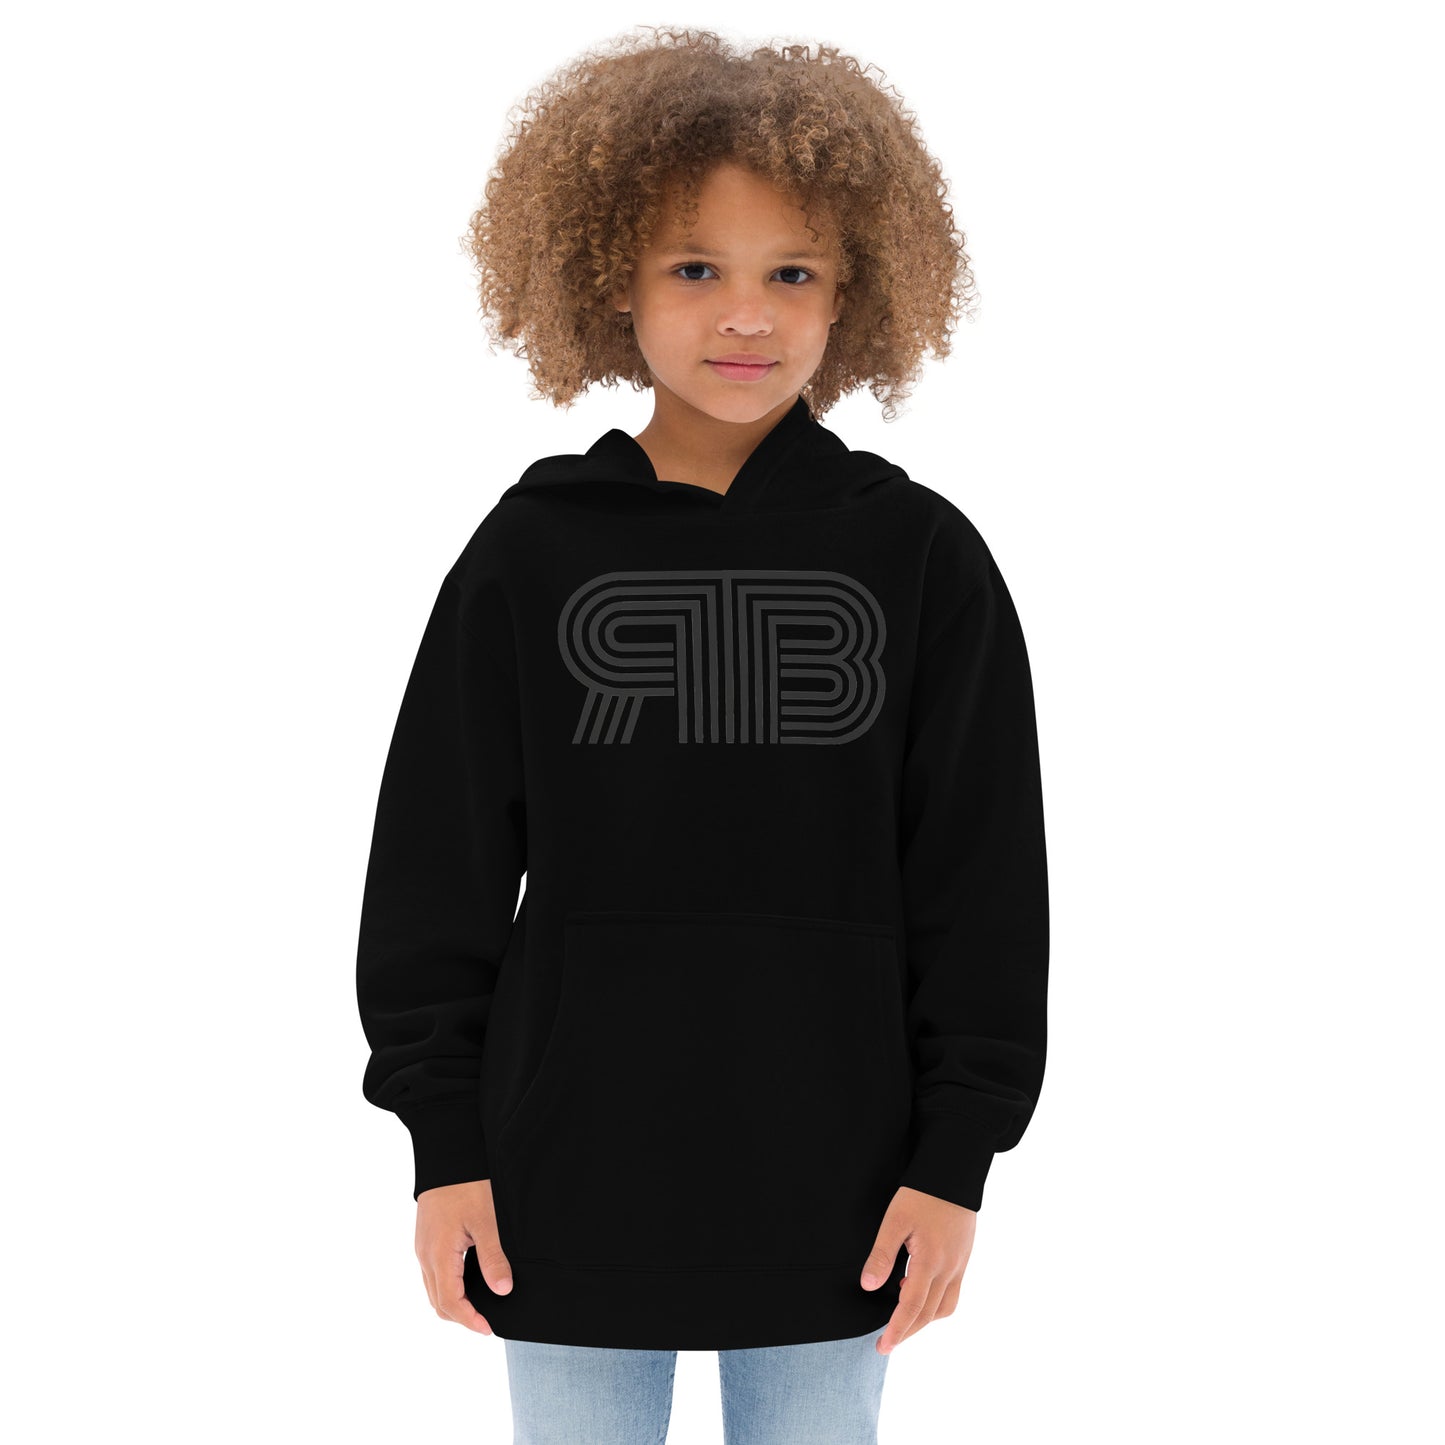 RB Youth Hoodie "Black-Out"